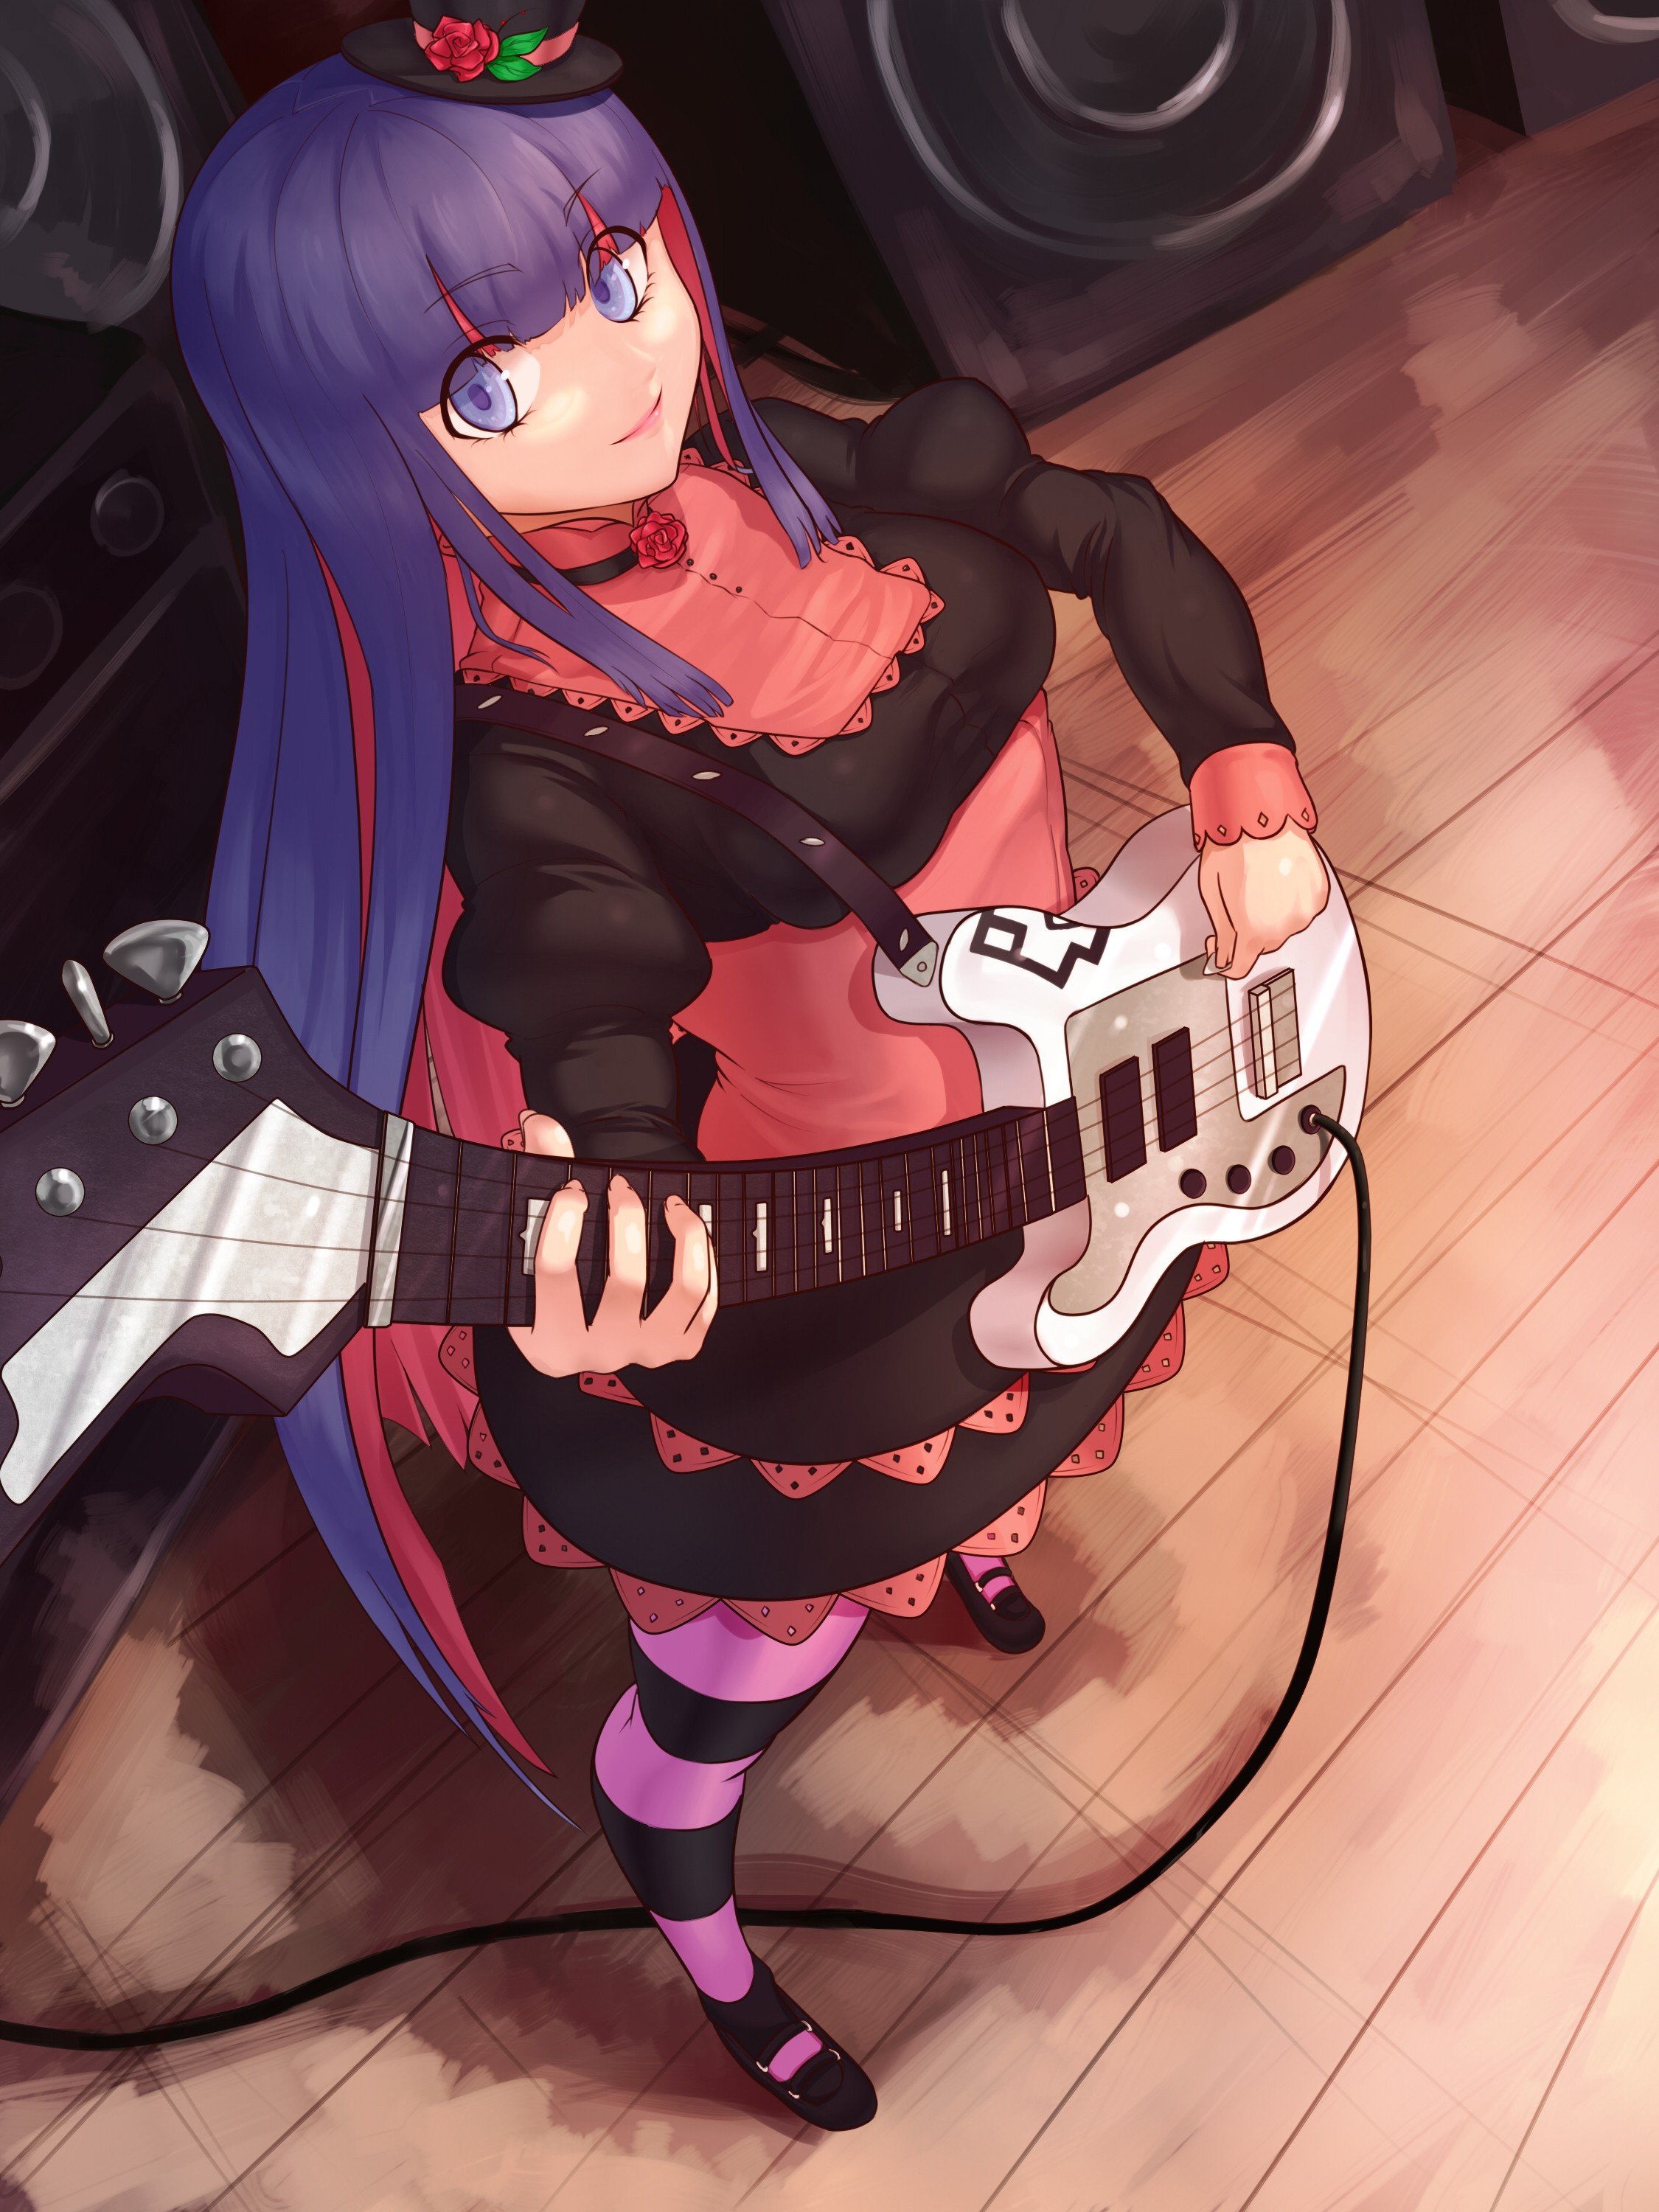 anime, Panty and Stocking with Garterbelt, Electric guitar, Anarchy Stocking Wallpaper